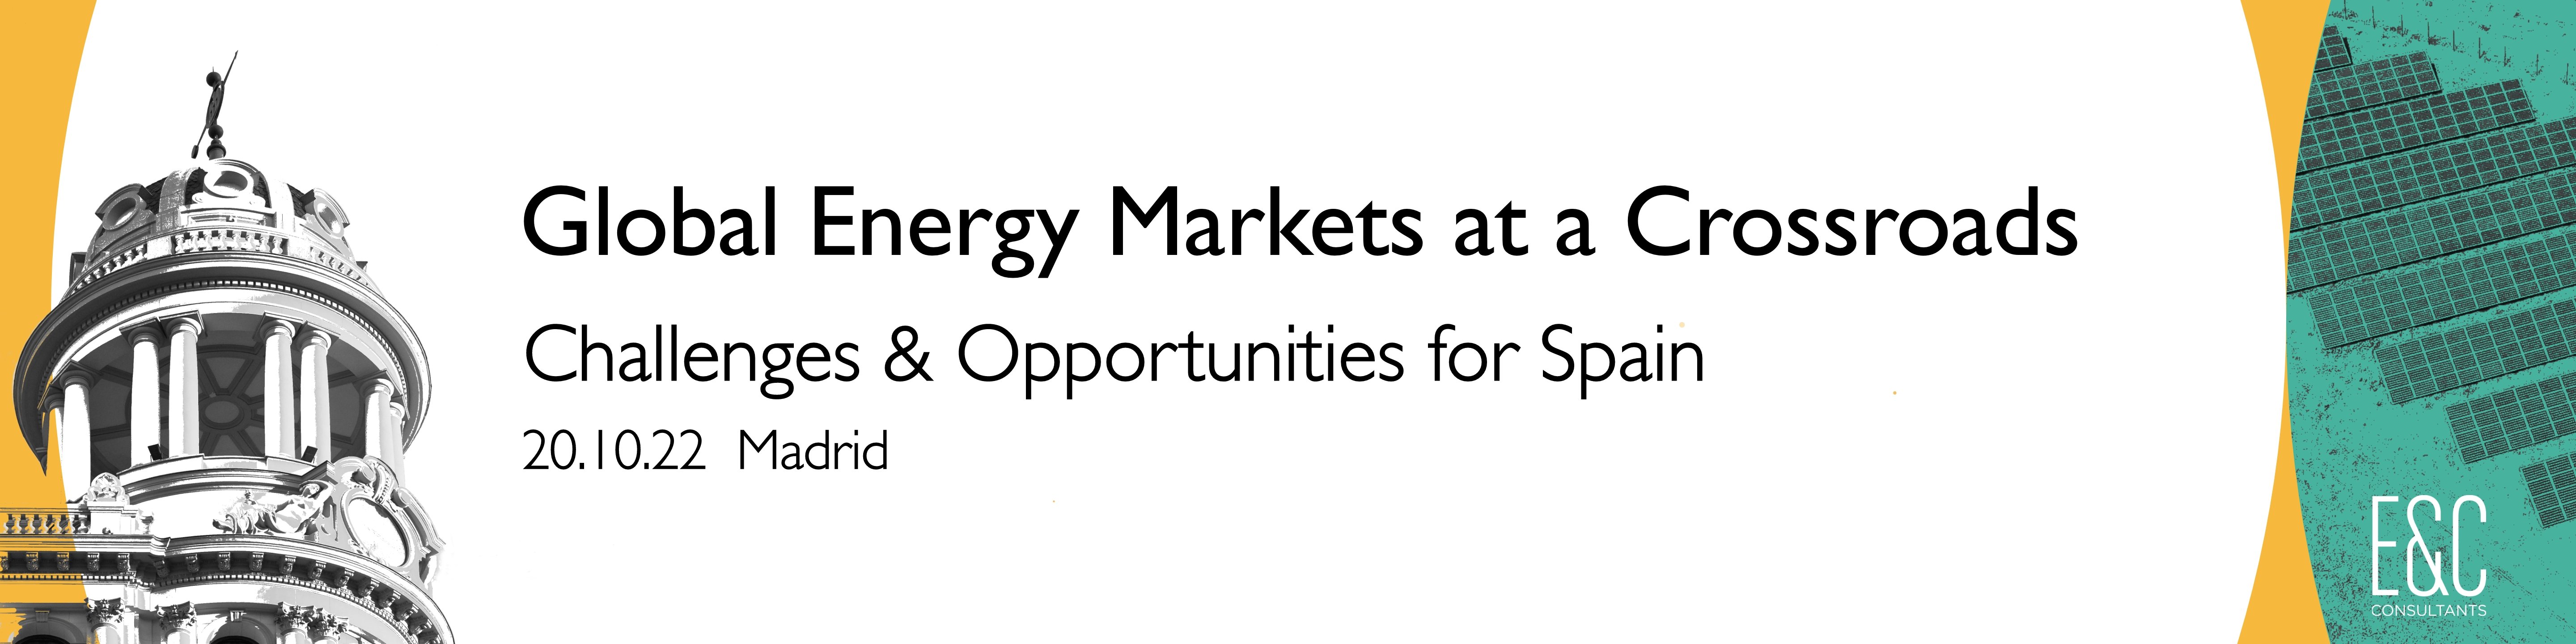 Global Energy Markets at a Crossroads-Challenges and Opportunities for Spain